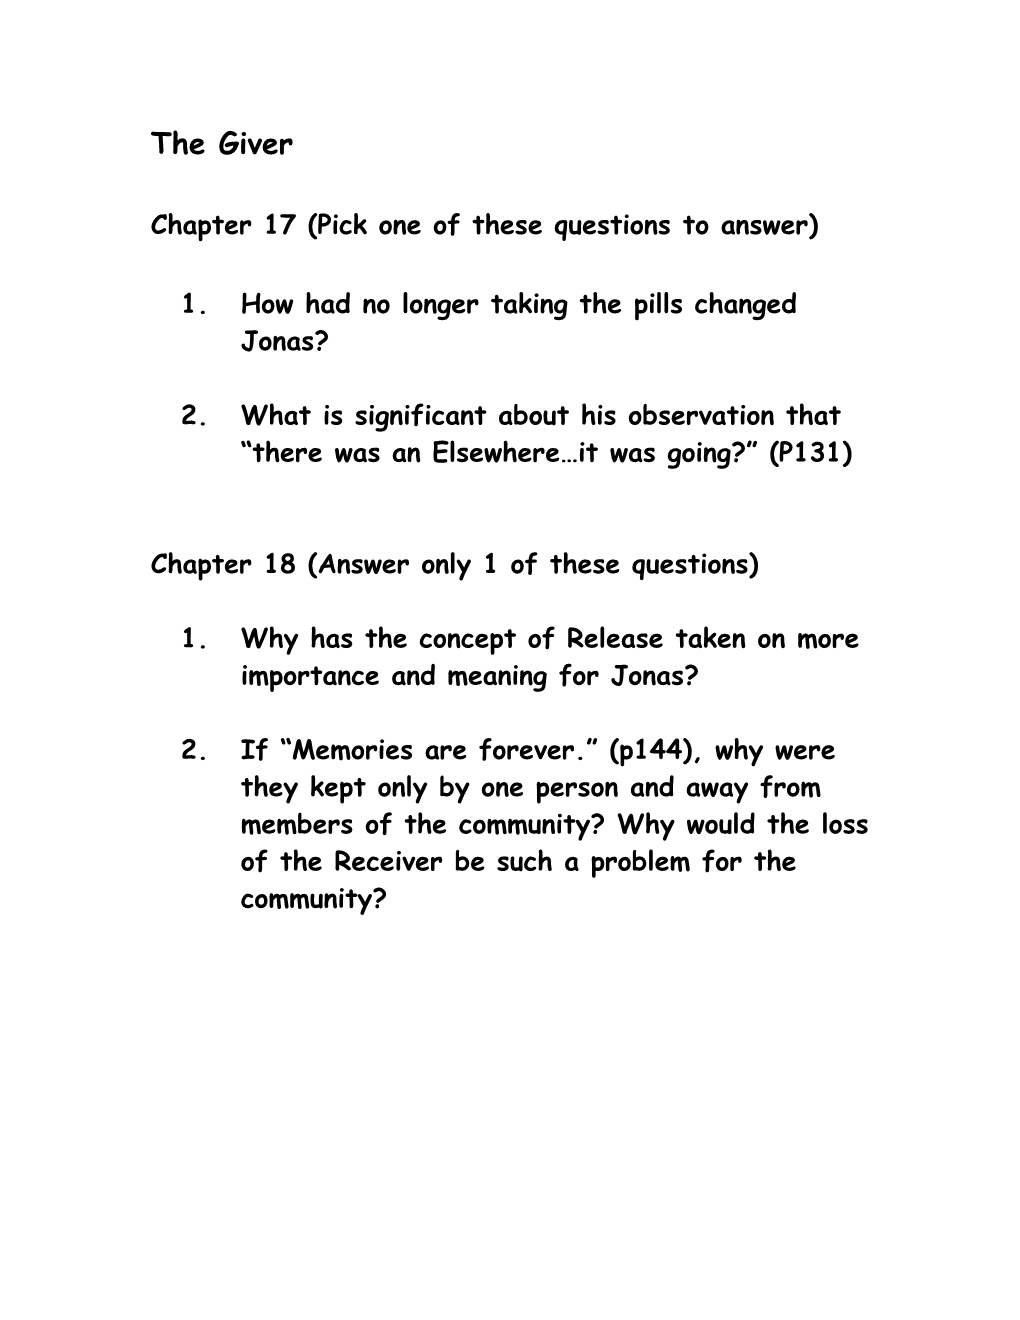 Chapter 17 (Pick One of These Questions to Answer)